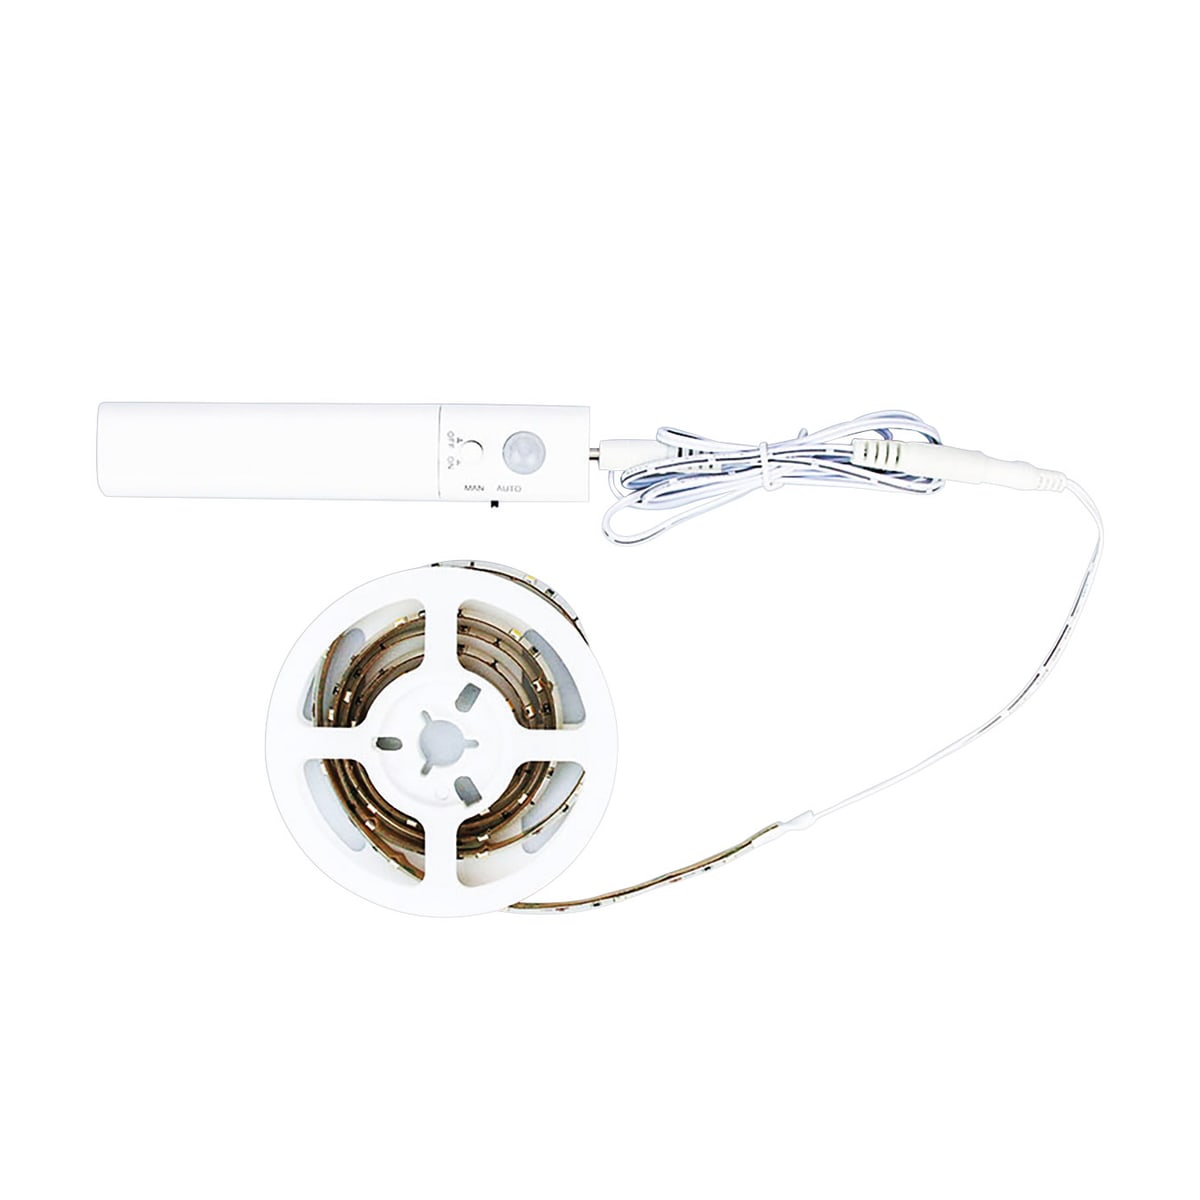 LED STRIP KIT 1MT 2,4W DAYLIGHT BATTERY OPERATED WITH MOTION SENSOR IP65